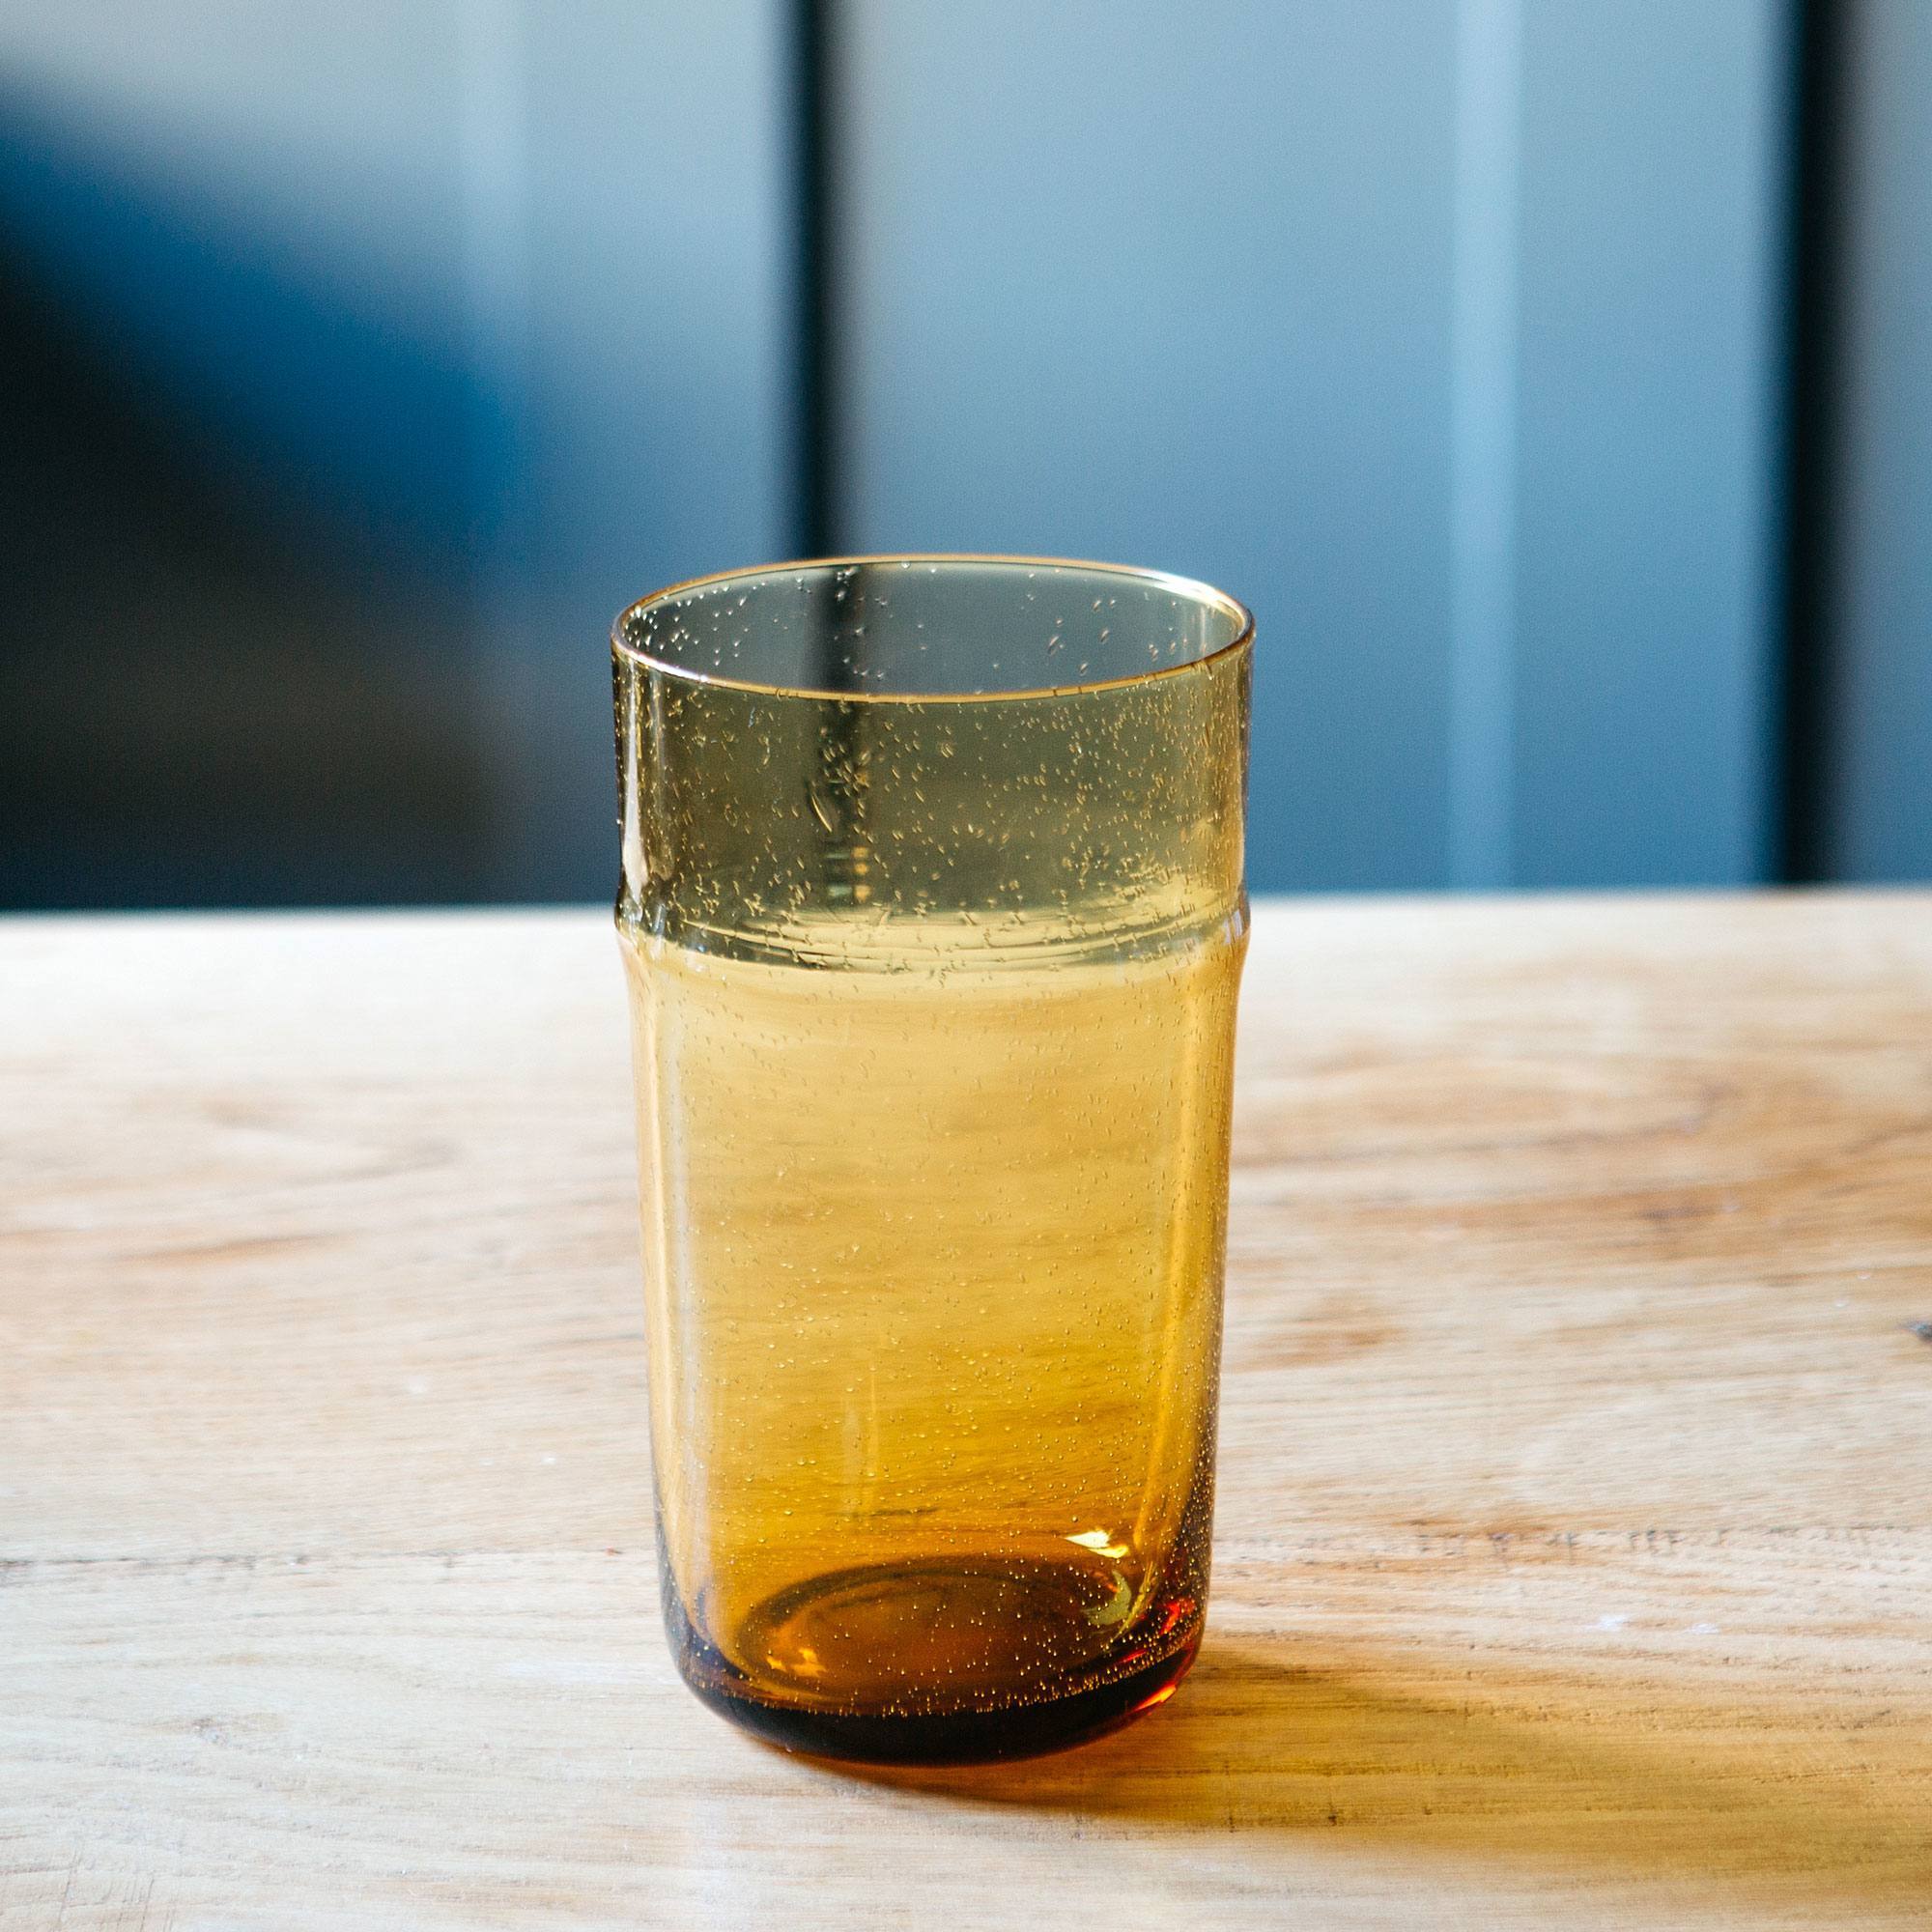 Read more about Graham and green amber glass tumbler